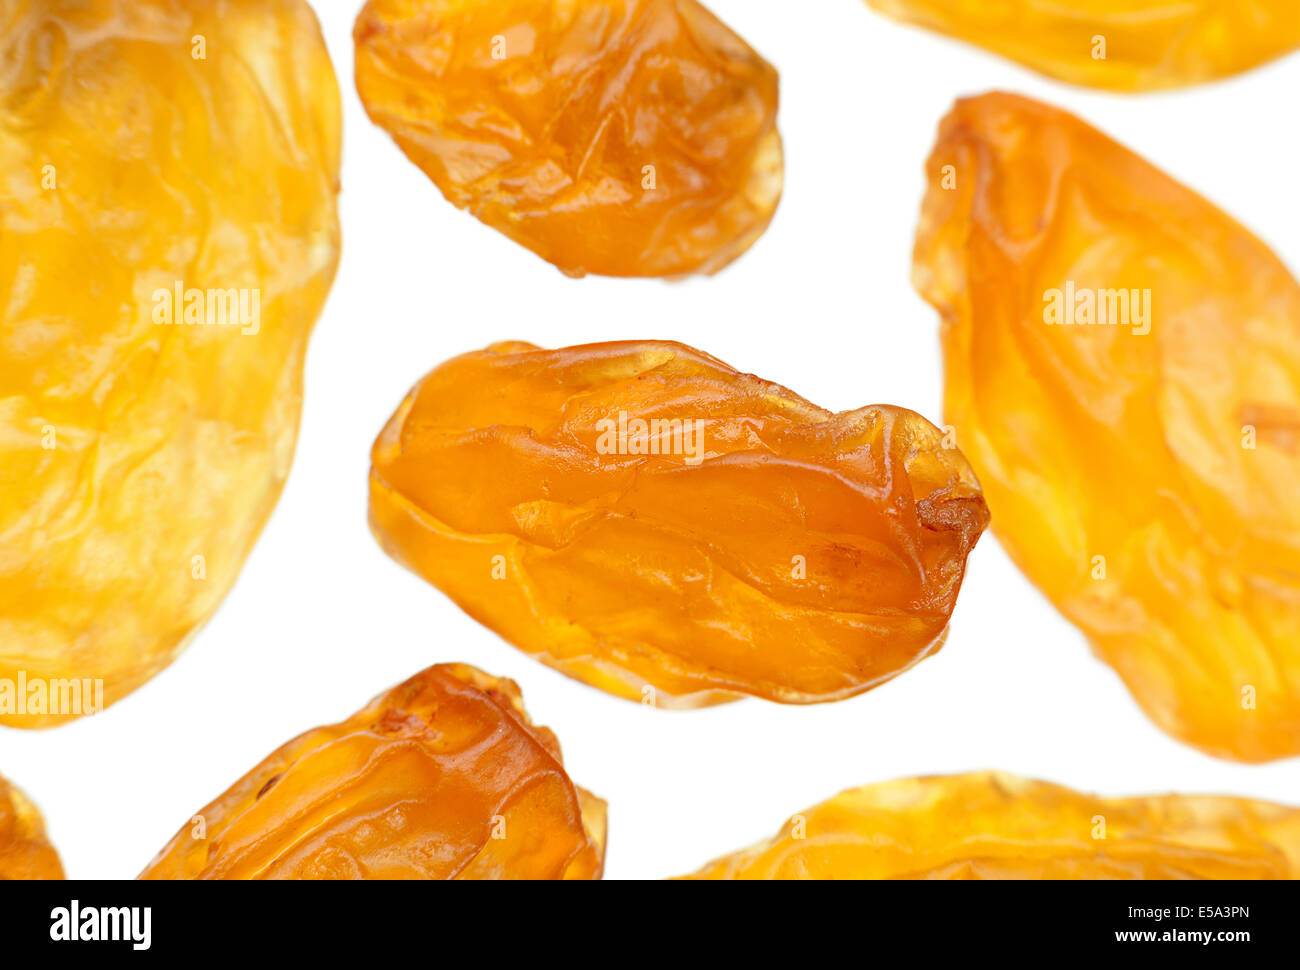 Raisin jaune libre isolated on white Banque D'Images